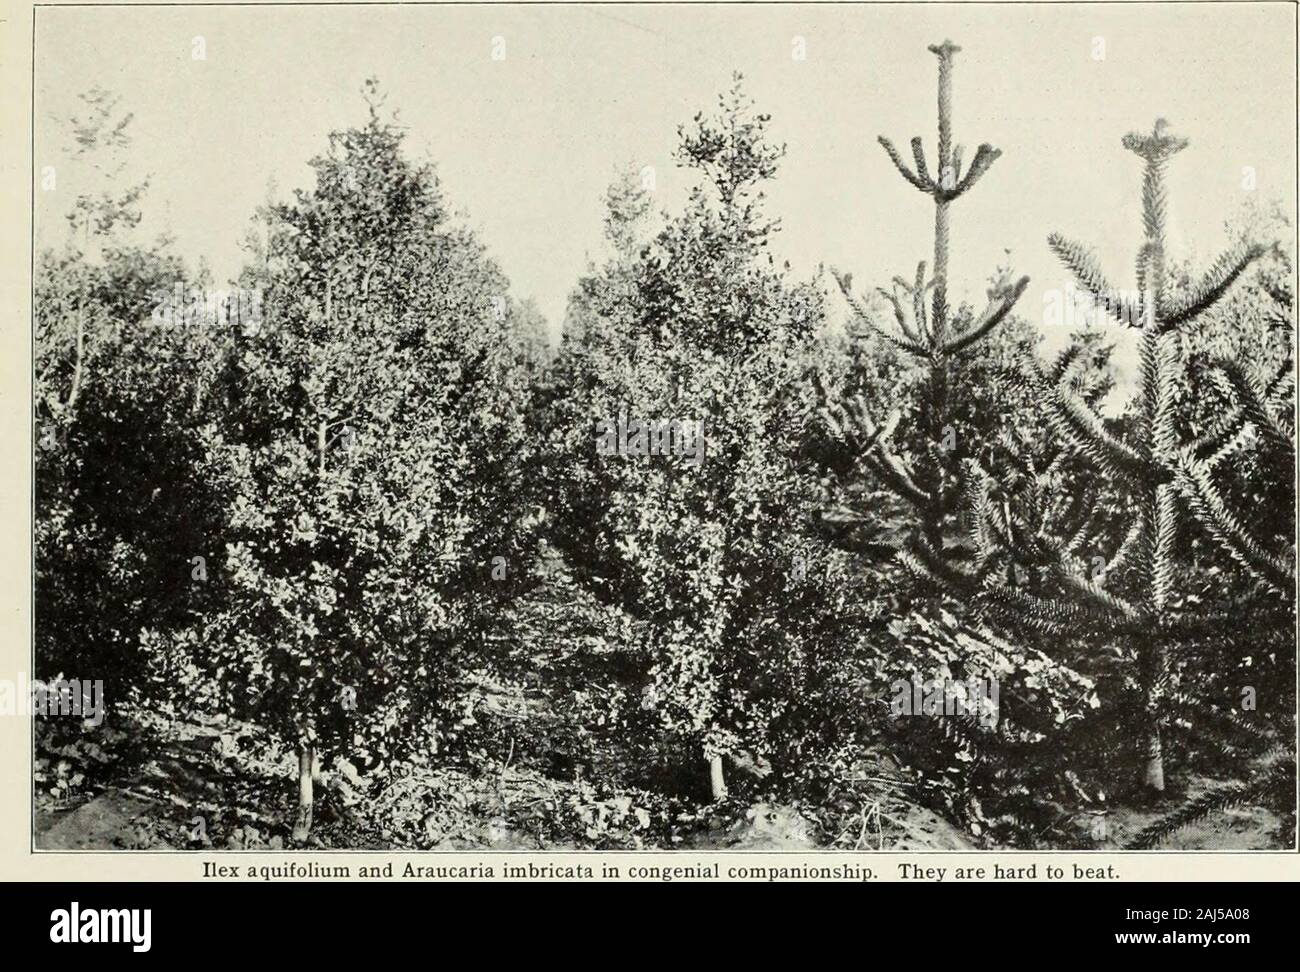 Wholesale price list spring of 1918 : for nurserymen only . Just to give an idea of the fine type of our evergreens. Read-ing from left to right: Juniperus sabina; Bambusa aurea;Cotoneaster microphylla. T. baccata fastigiata. IRISH YEW. boxed 5 to 5V2 5 00 boxed 4J^ to 5 4 00 T. baccata washingtoni. boxed ±y2 to 5 3 00 boxed 3y2 to 4 2 50 THUJA: Arbor Vitae. T. gigantea. GIANT ARBOR VITAE. boxed 10 to 12 8 00 boxed 9 to 10 6 00 boxed 8 to 9 • 5 00 boxed 7 to 8 4 00 T. gigantea aurea. boxed 8 to 10 7 00 boxed 7 to 8 6 00 boxed 6 to 7 4 00 T. orientalis. CHINESE ARBOR VITAE. boxed 7 to 8 3 00 bo Stock Photo